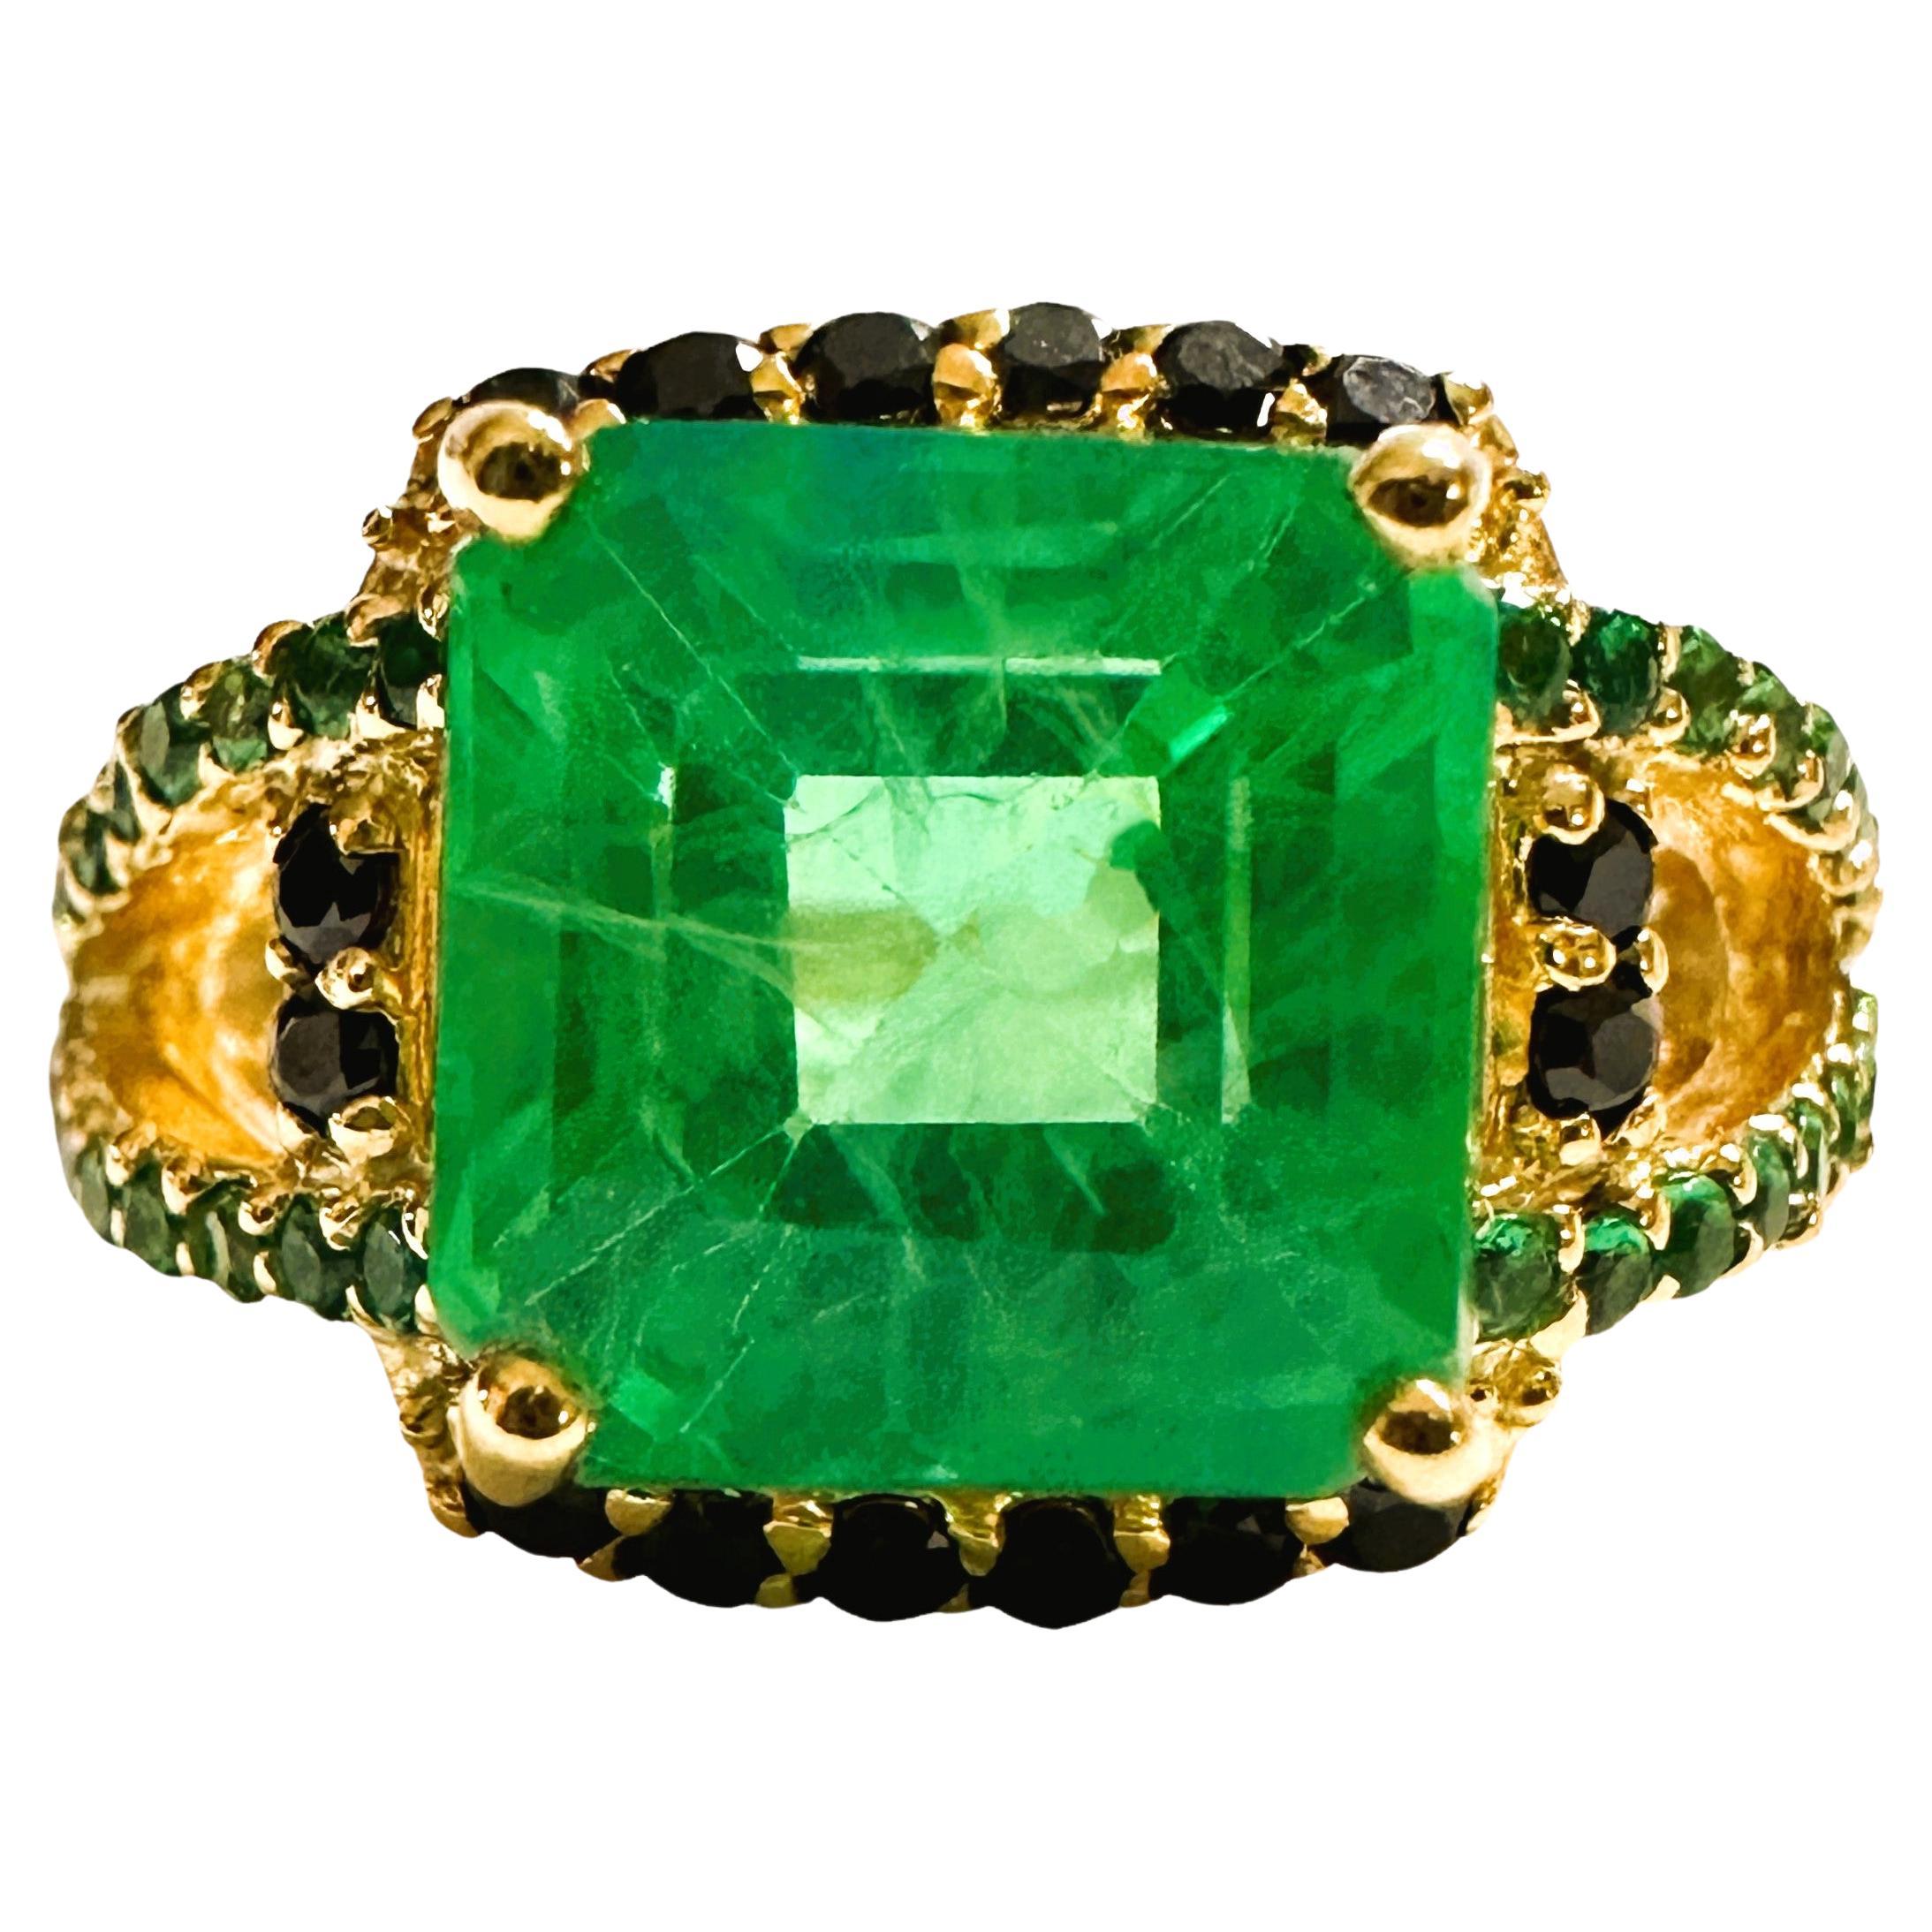 New African 6.20 Ct Emerald Green Garnet Sapphire & Spinel YGold Sterling Ring 